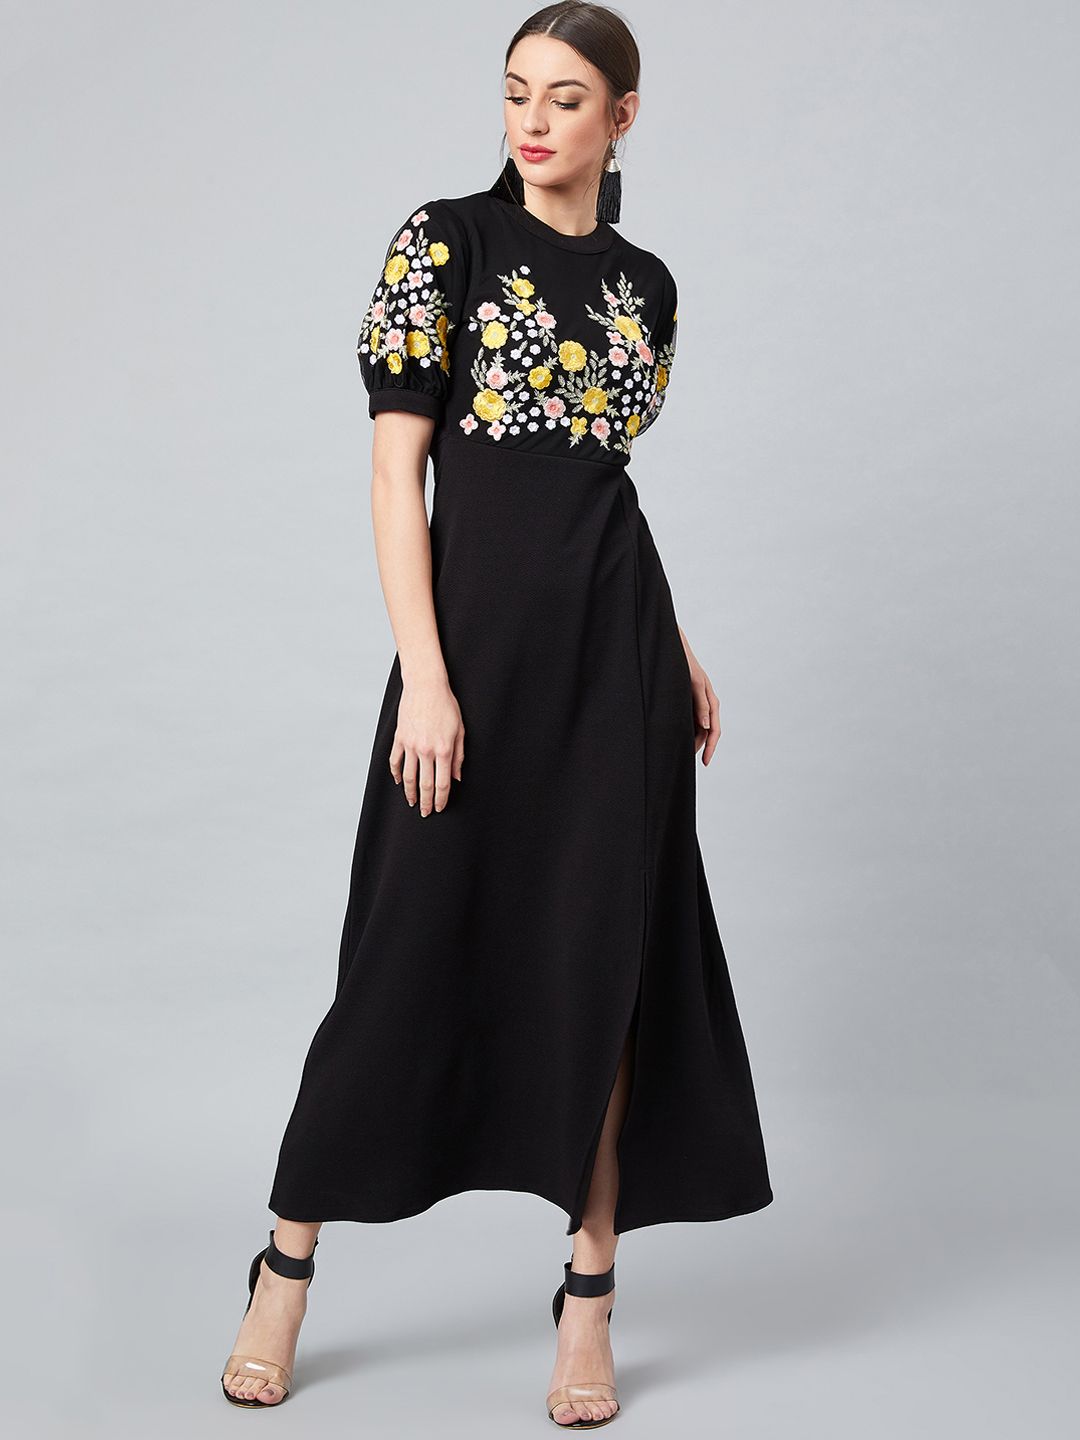 Athena Black 100% PolyesterEmbroidered Fit and Flare Dress Price in India